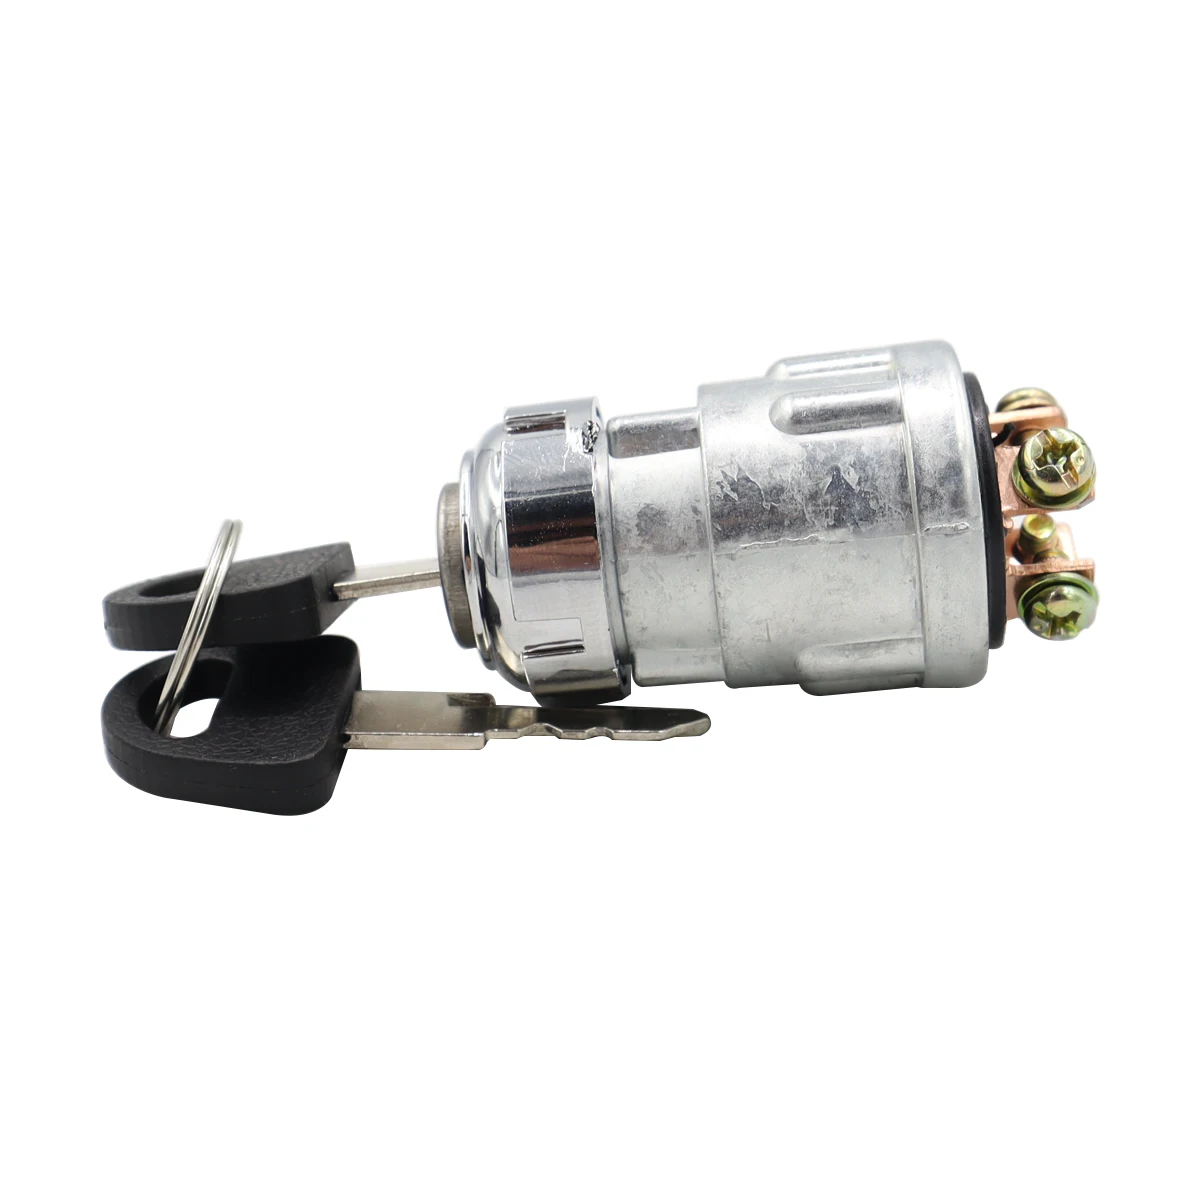 Universal Car Boat 12V 4 Position Ignition ON /OFF /Start Ignition Switch Lock with 2 Keys for Petrol Engine Farm Machines